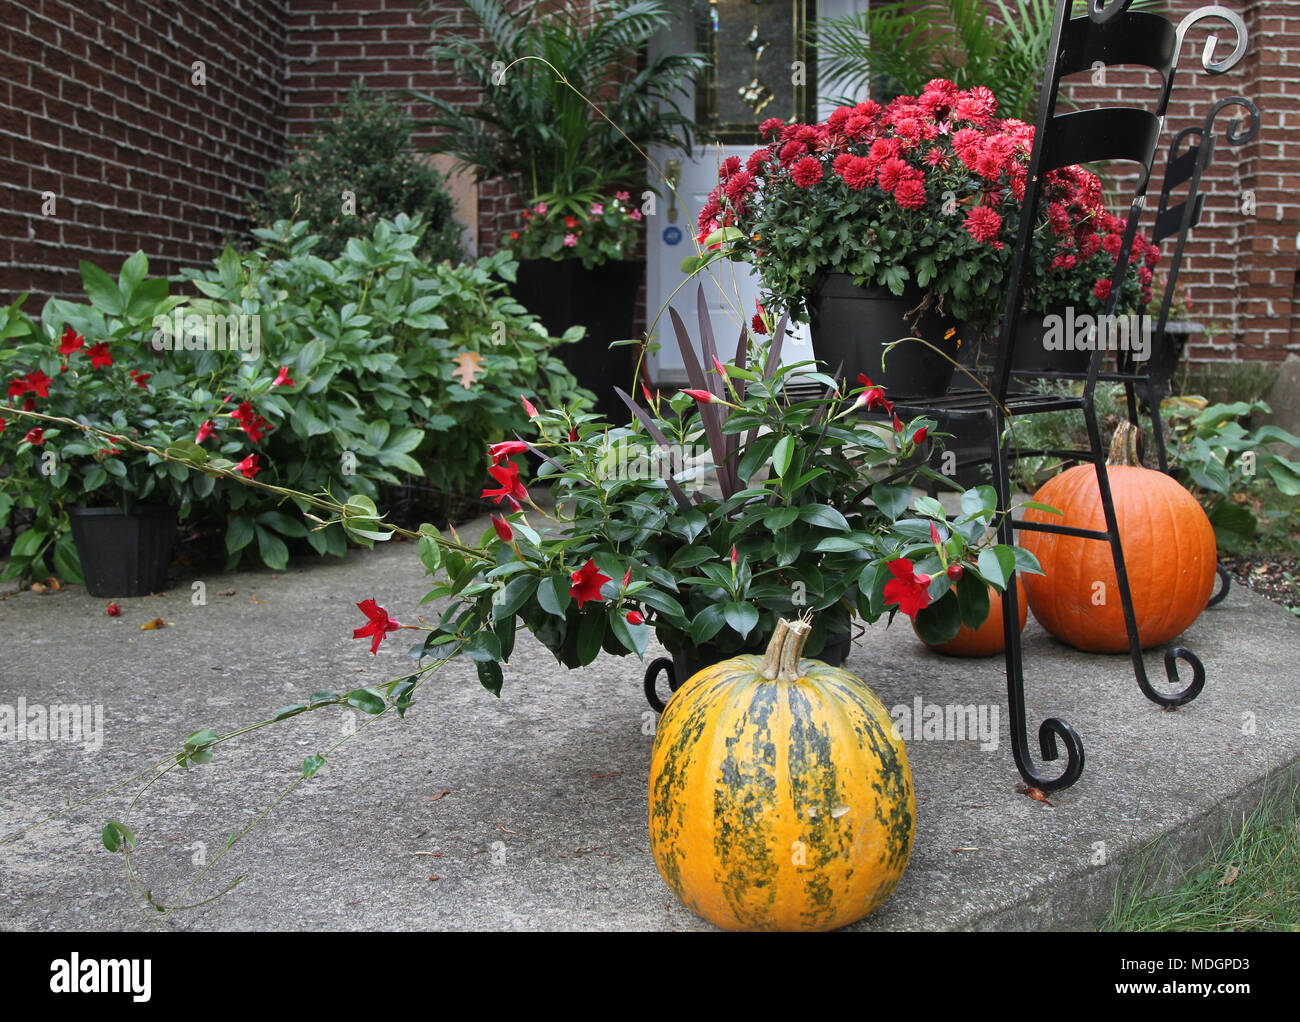 Colorful flowers and various types of pumpkins on display Stock Photo